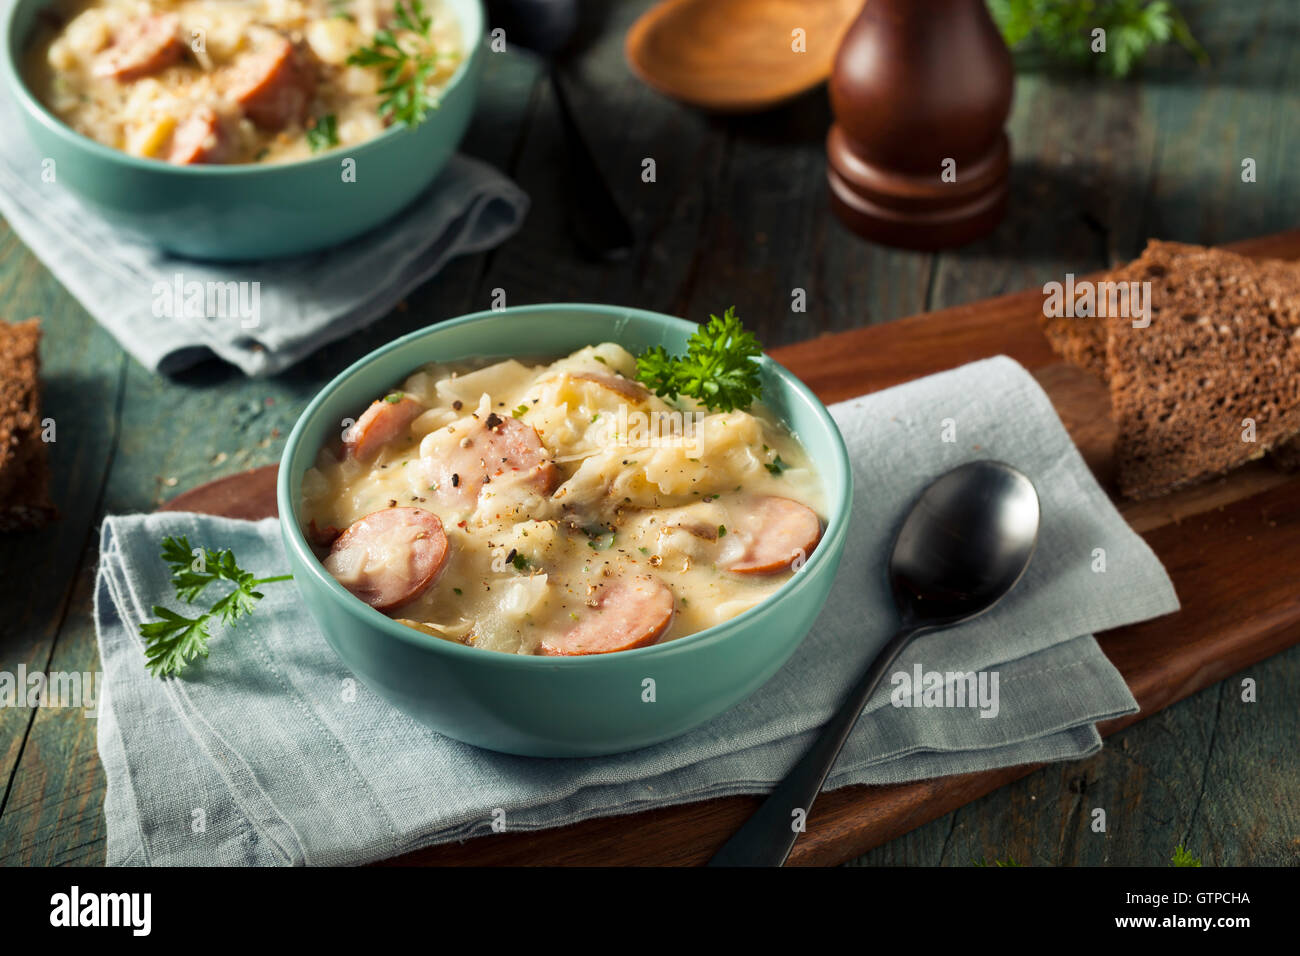 Homemade Sauerkraut and Sausage Soup with Potatoes and Parsley Stock Photo